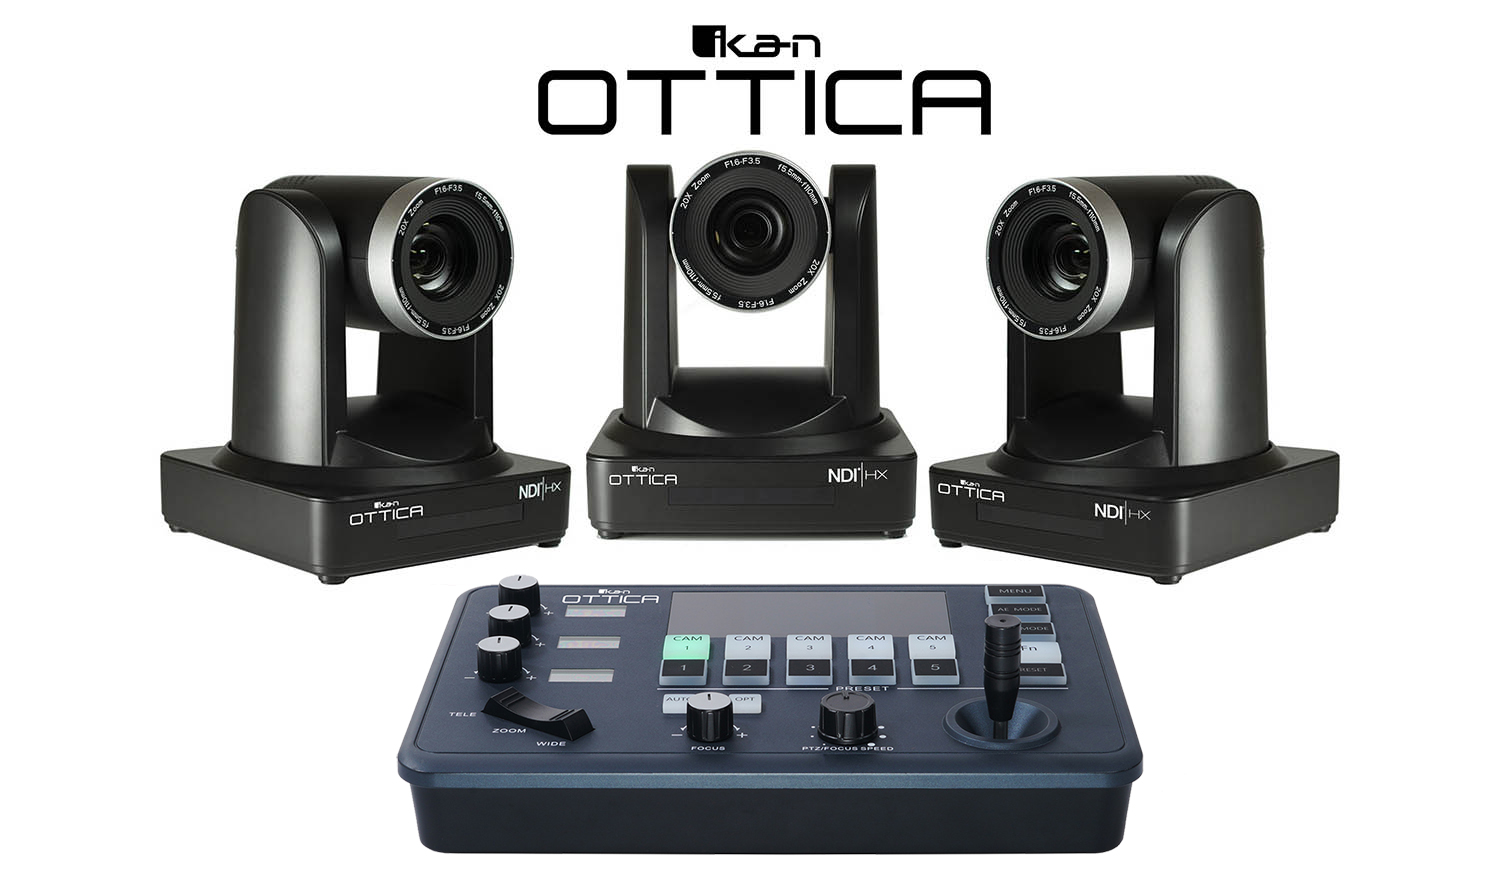 ikan ottica ptz camera bundle that comes with 3 cameras and a controller